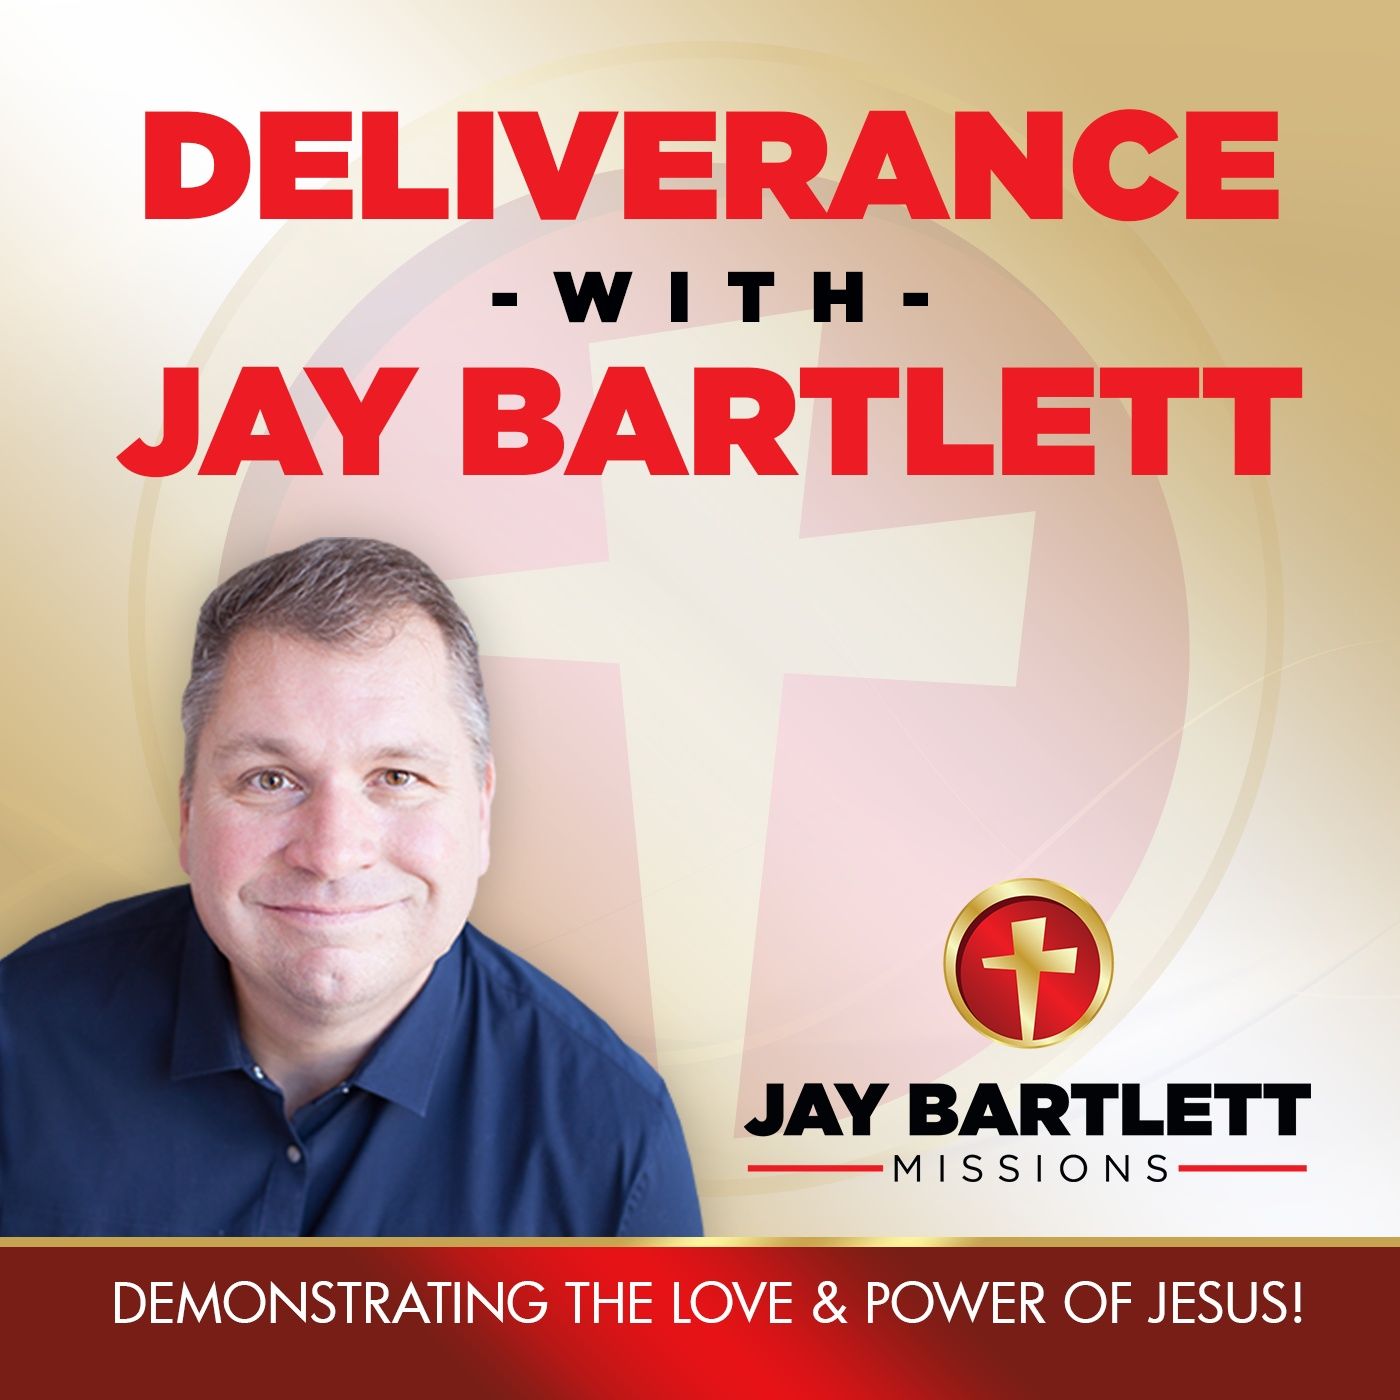 Deliverance with Jay Bartlett: Expose Evil, Expel Evil